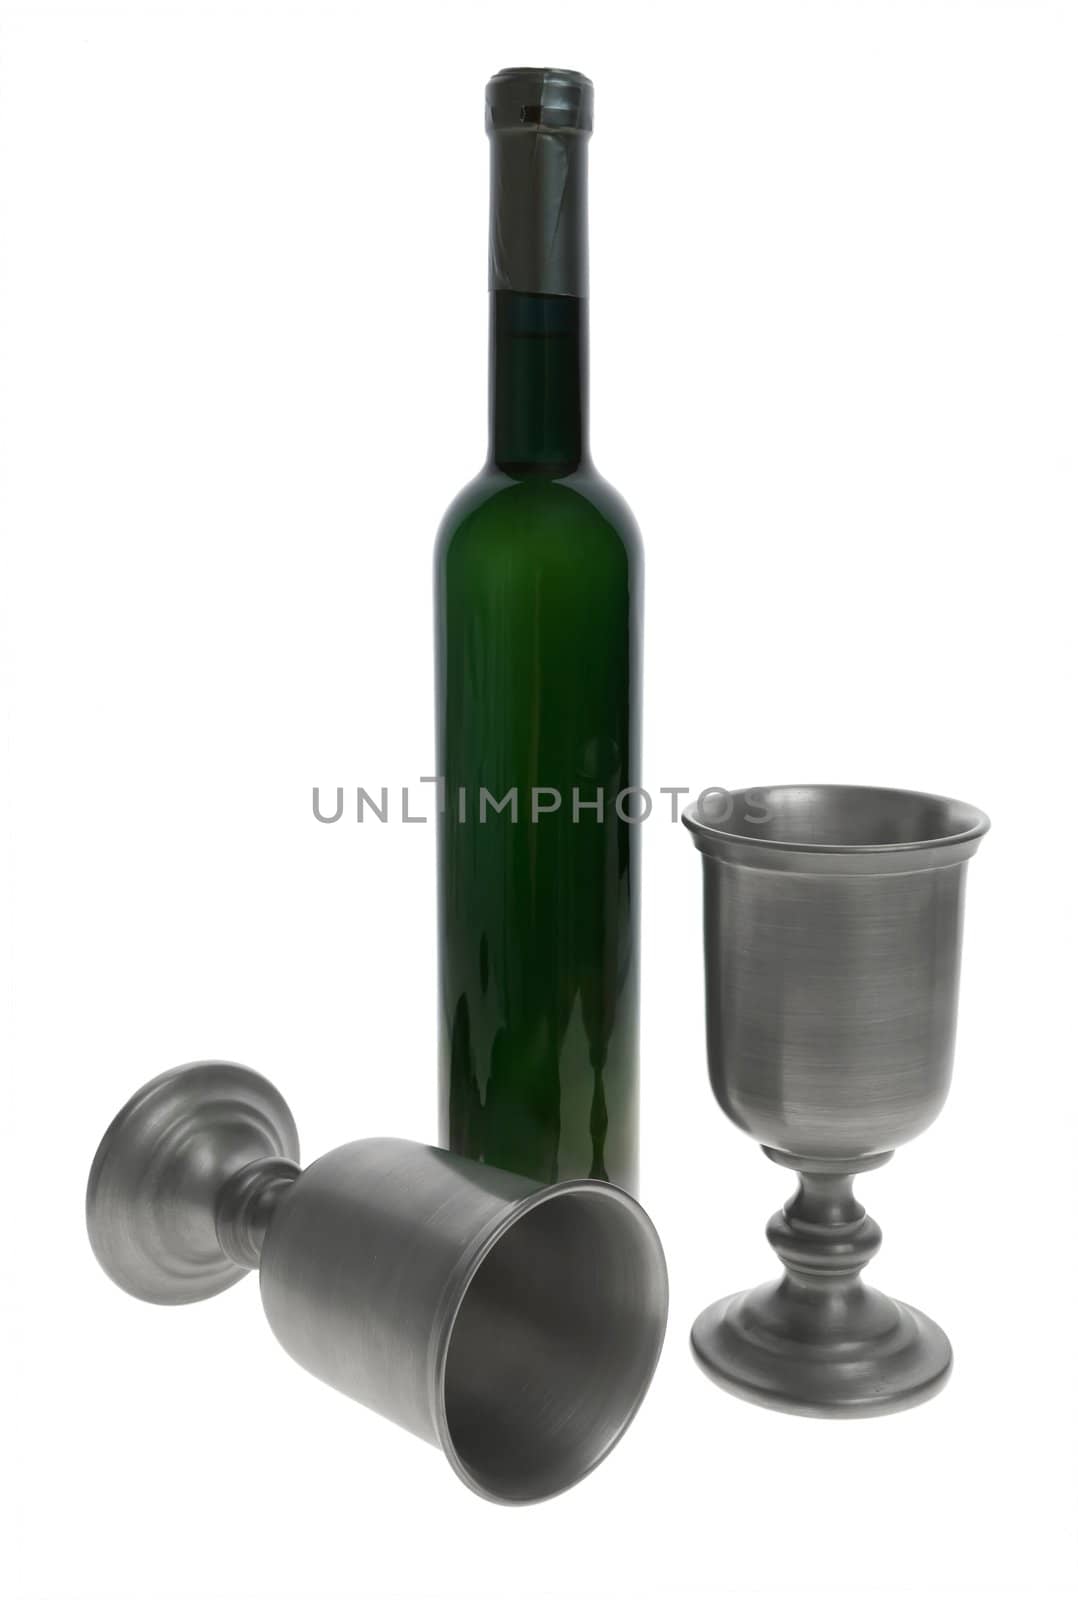 Silver wine goblets and bottle